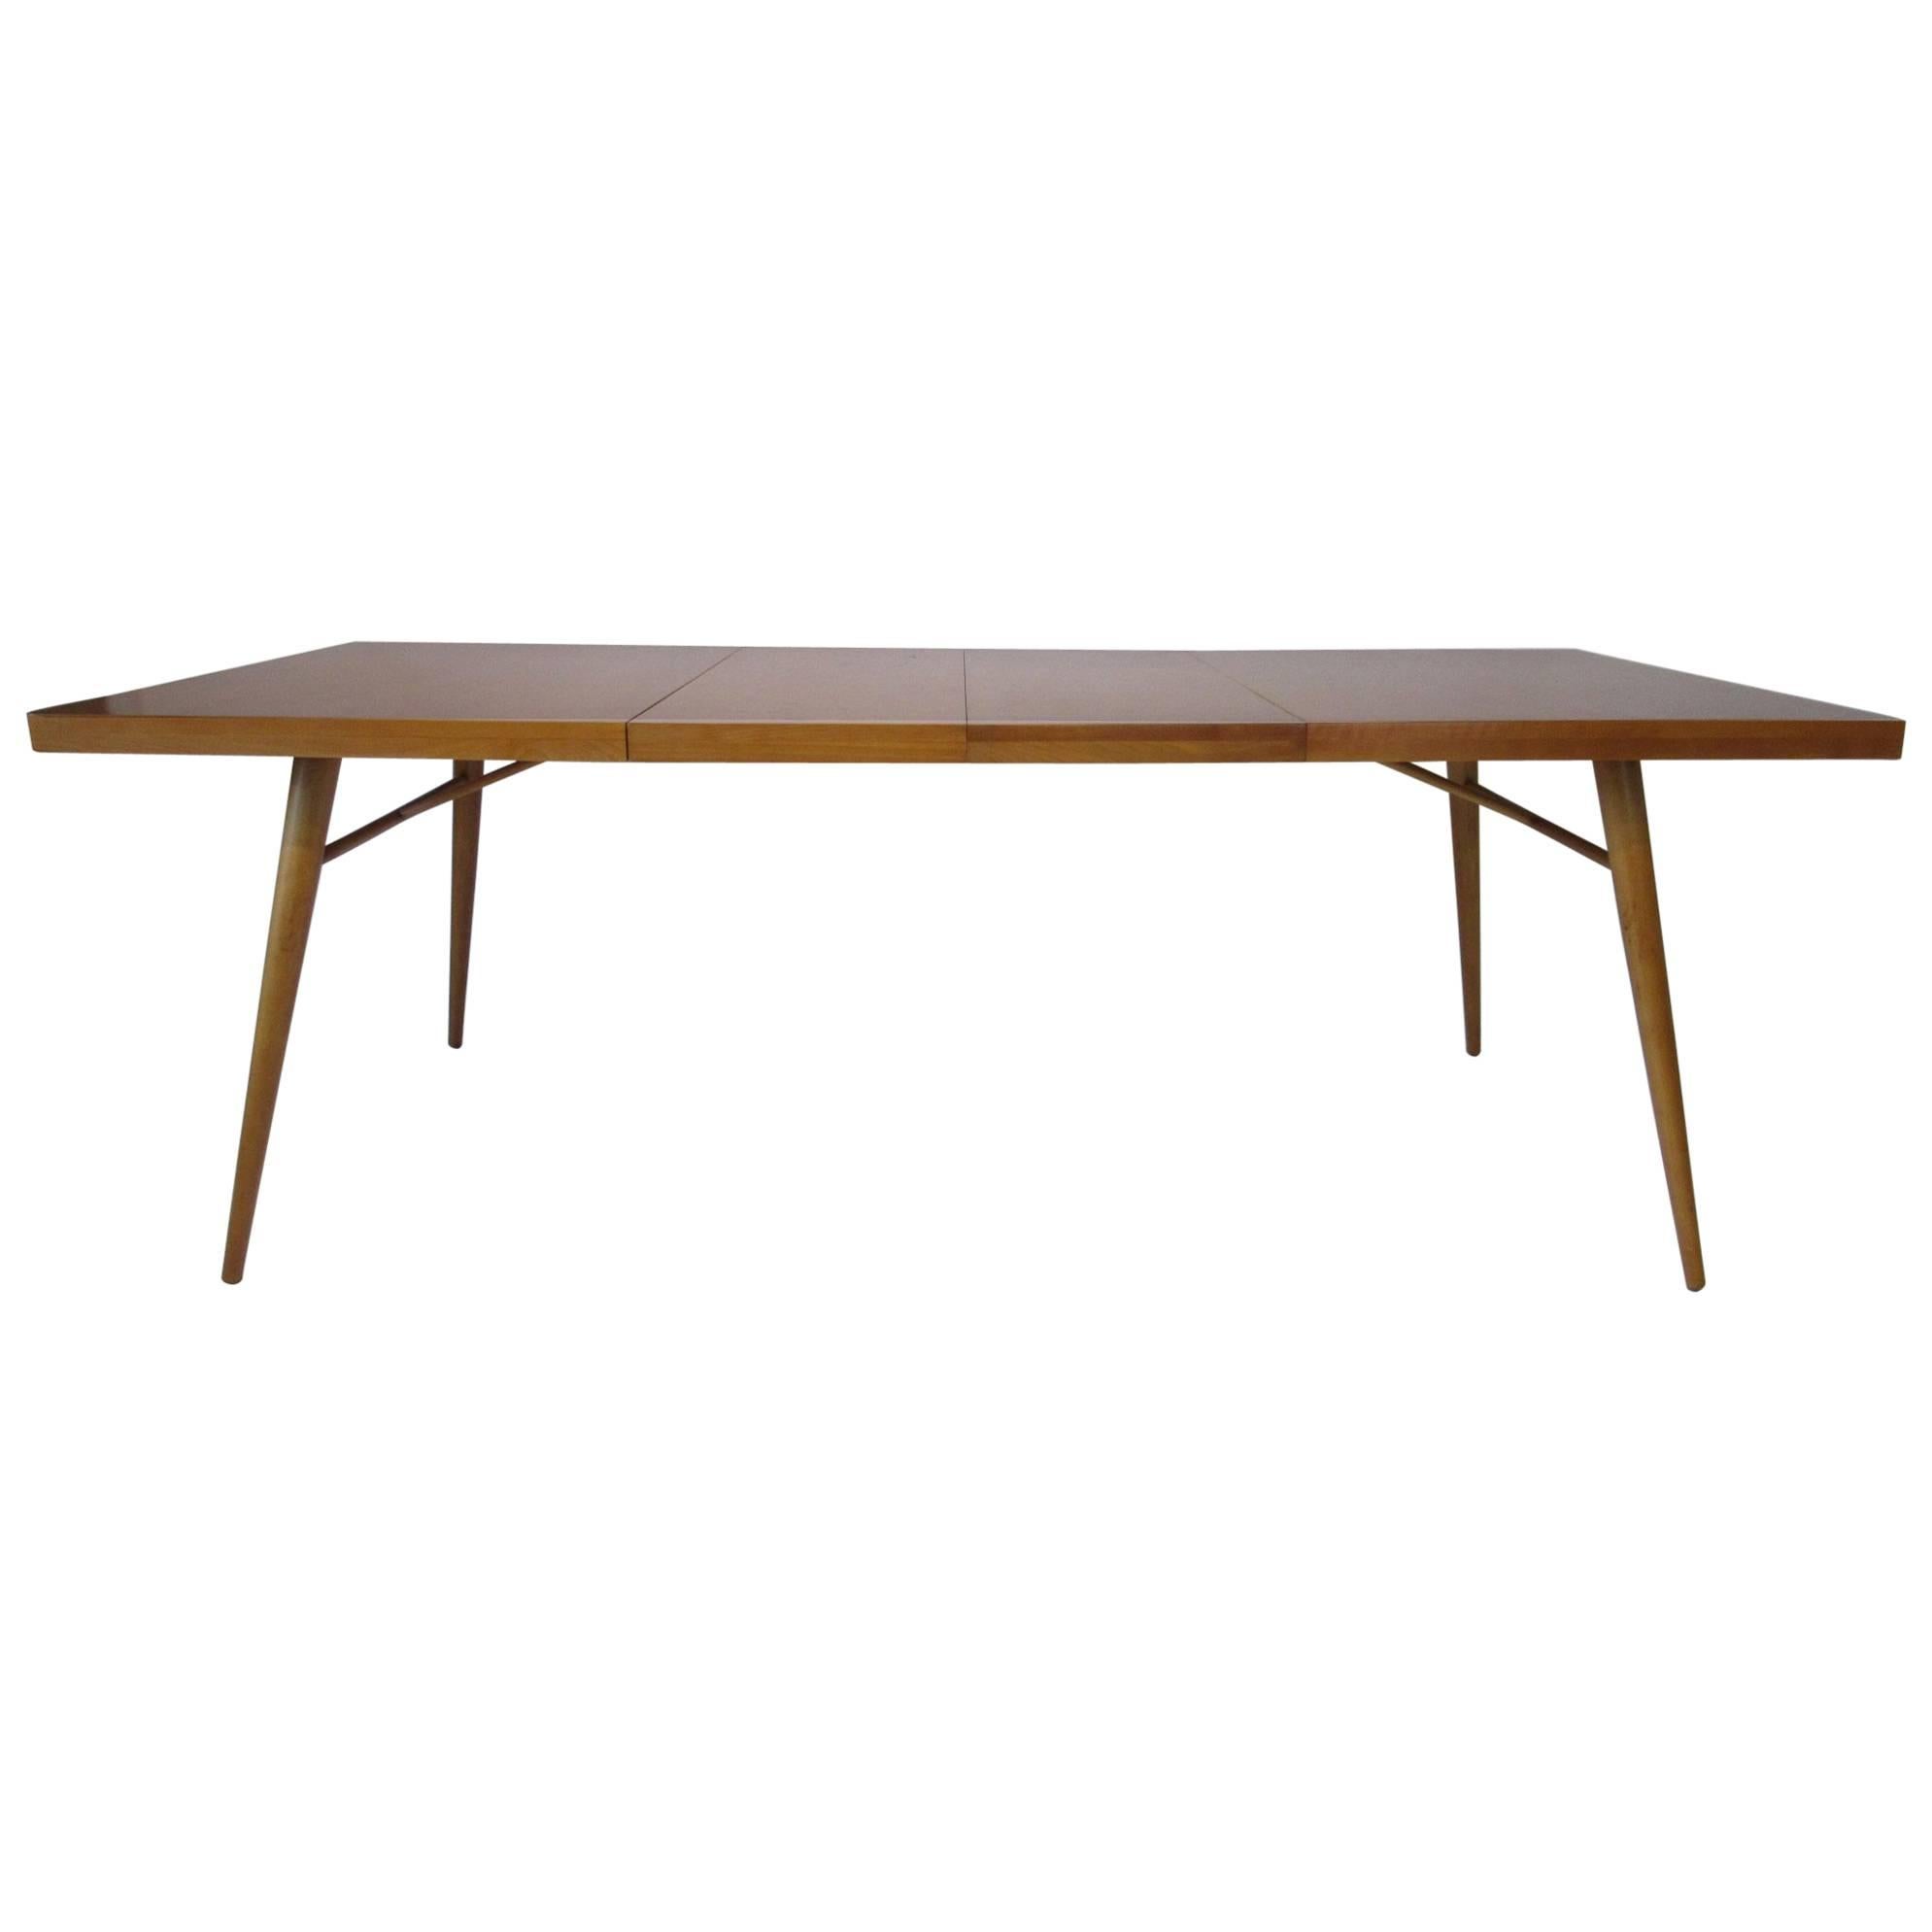 Paul McCobb Planner Group Dining Table with Two Leaves